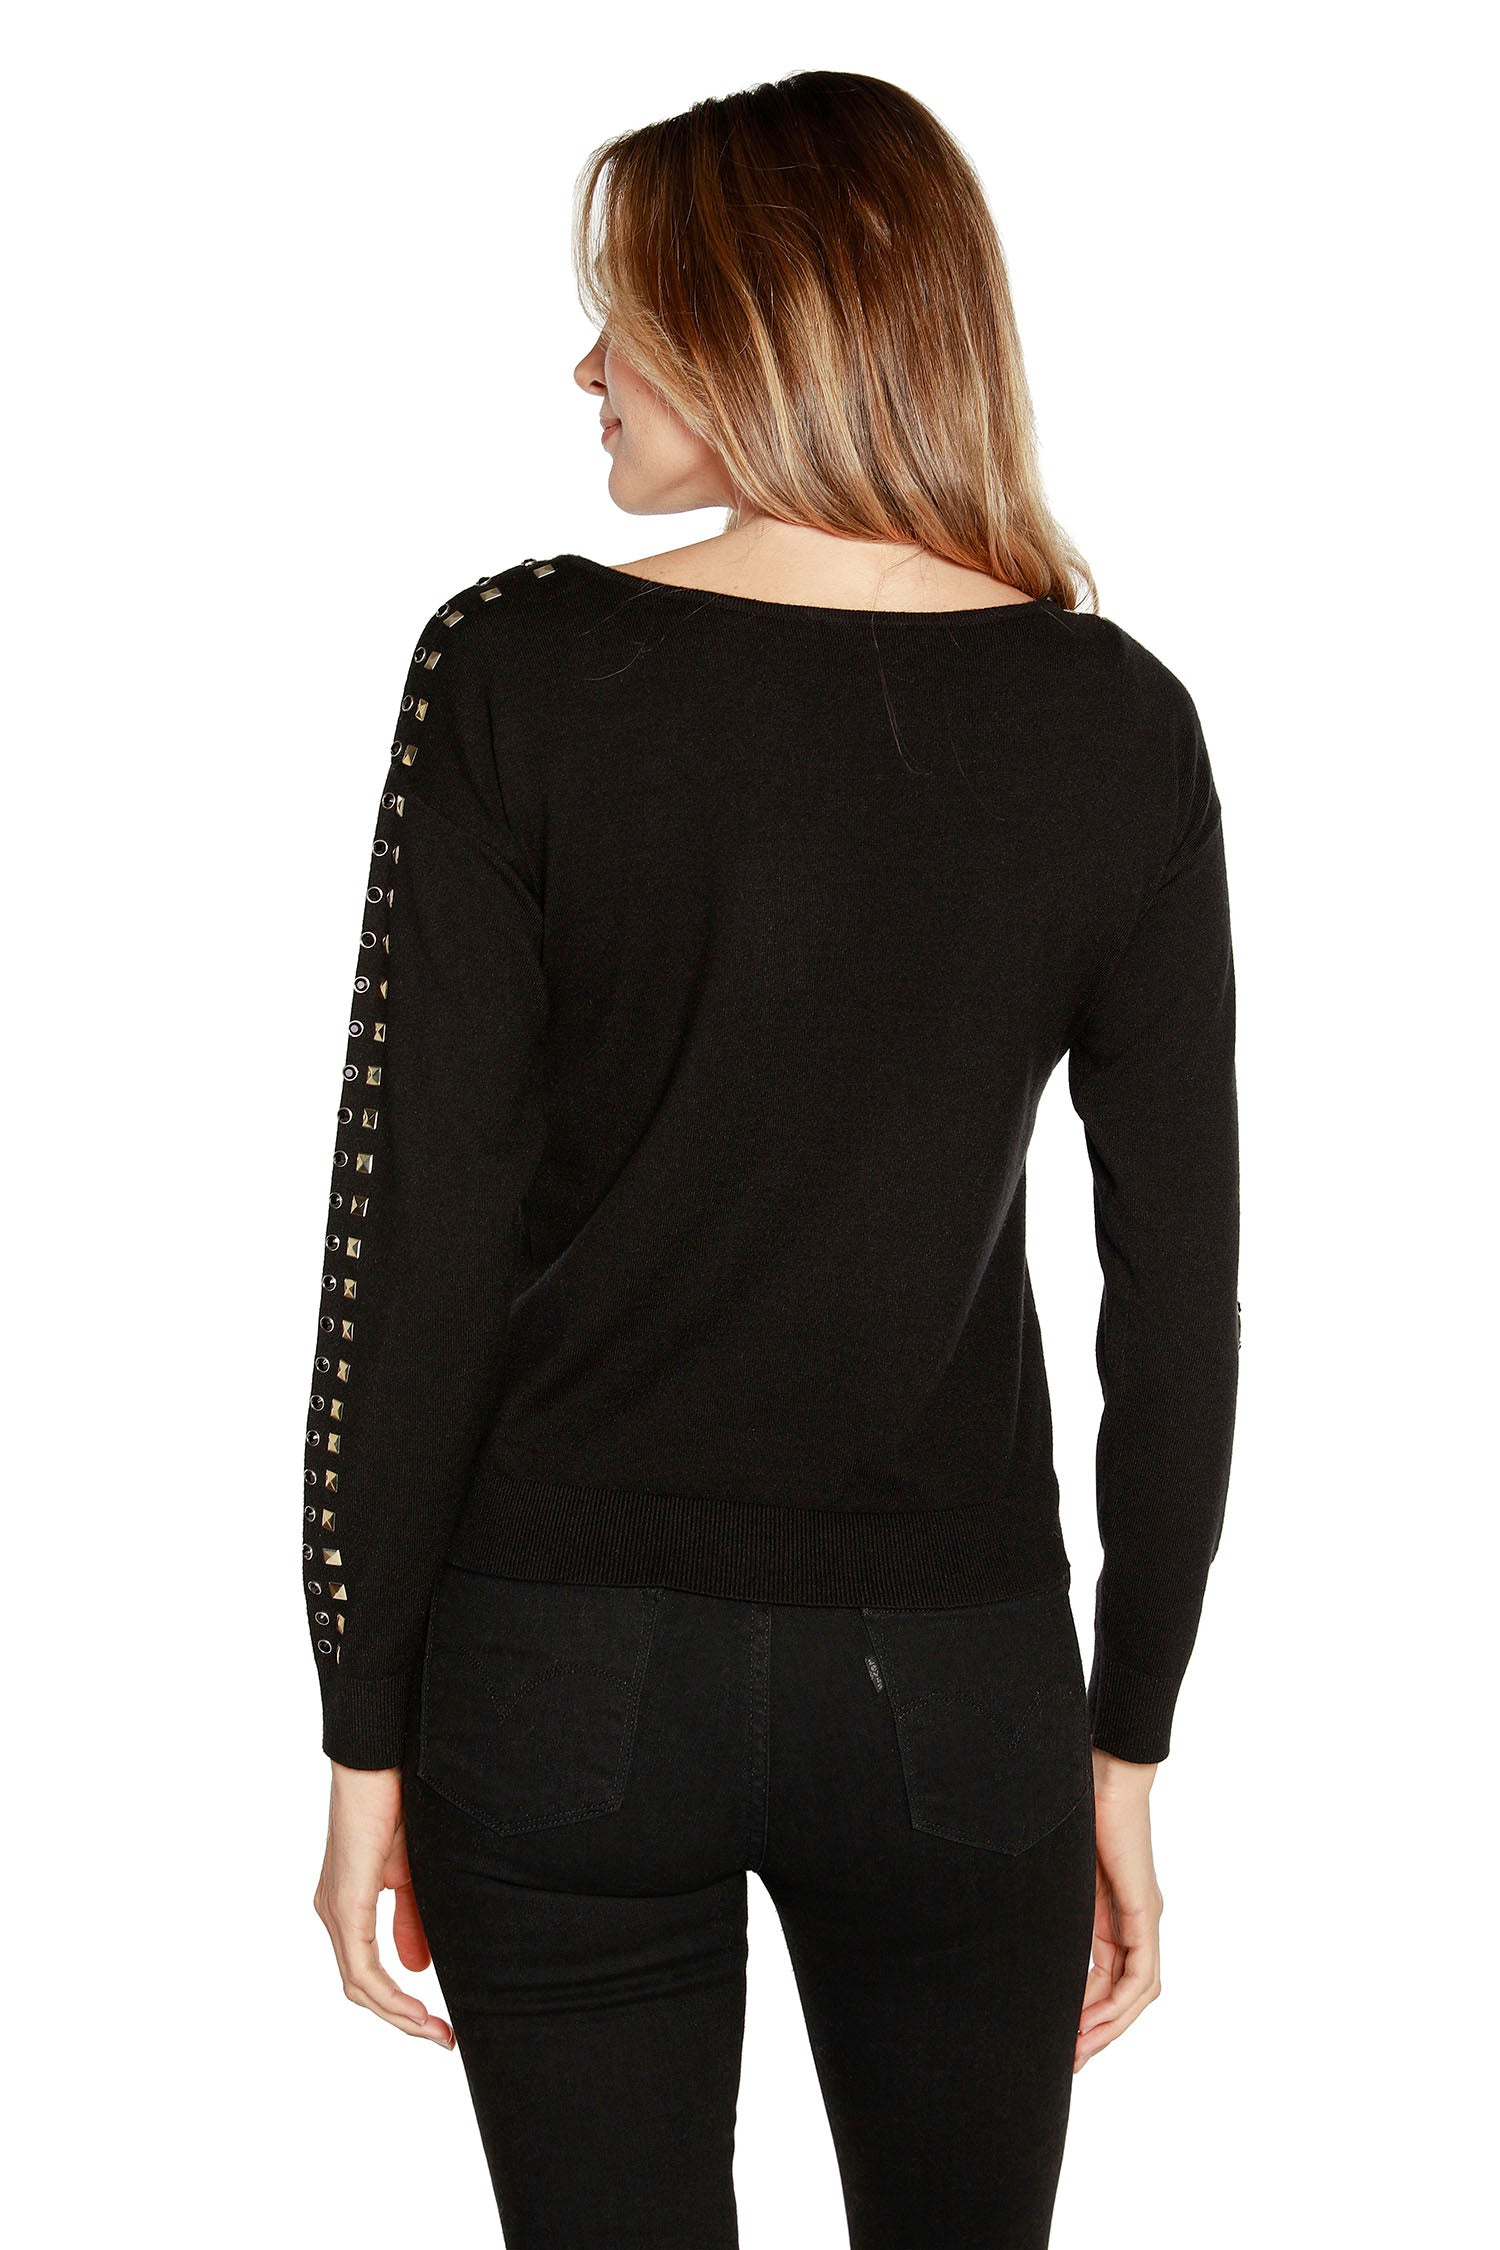 Women’s Lightweight Boat Neck Sweater with Rhinestones and Studs